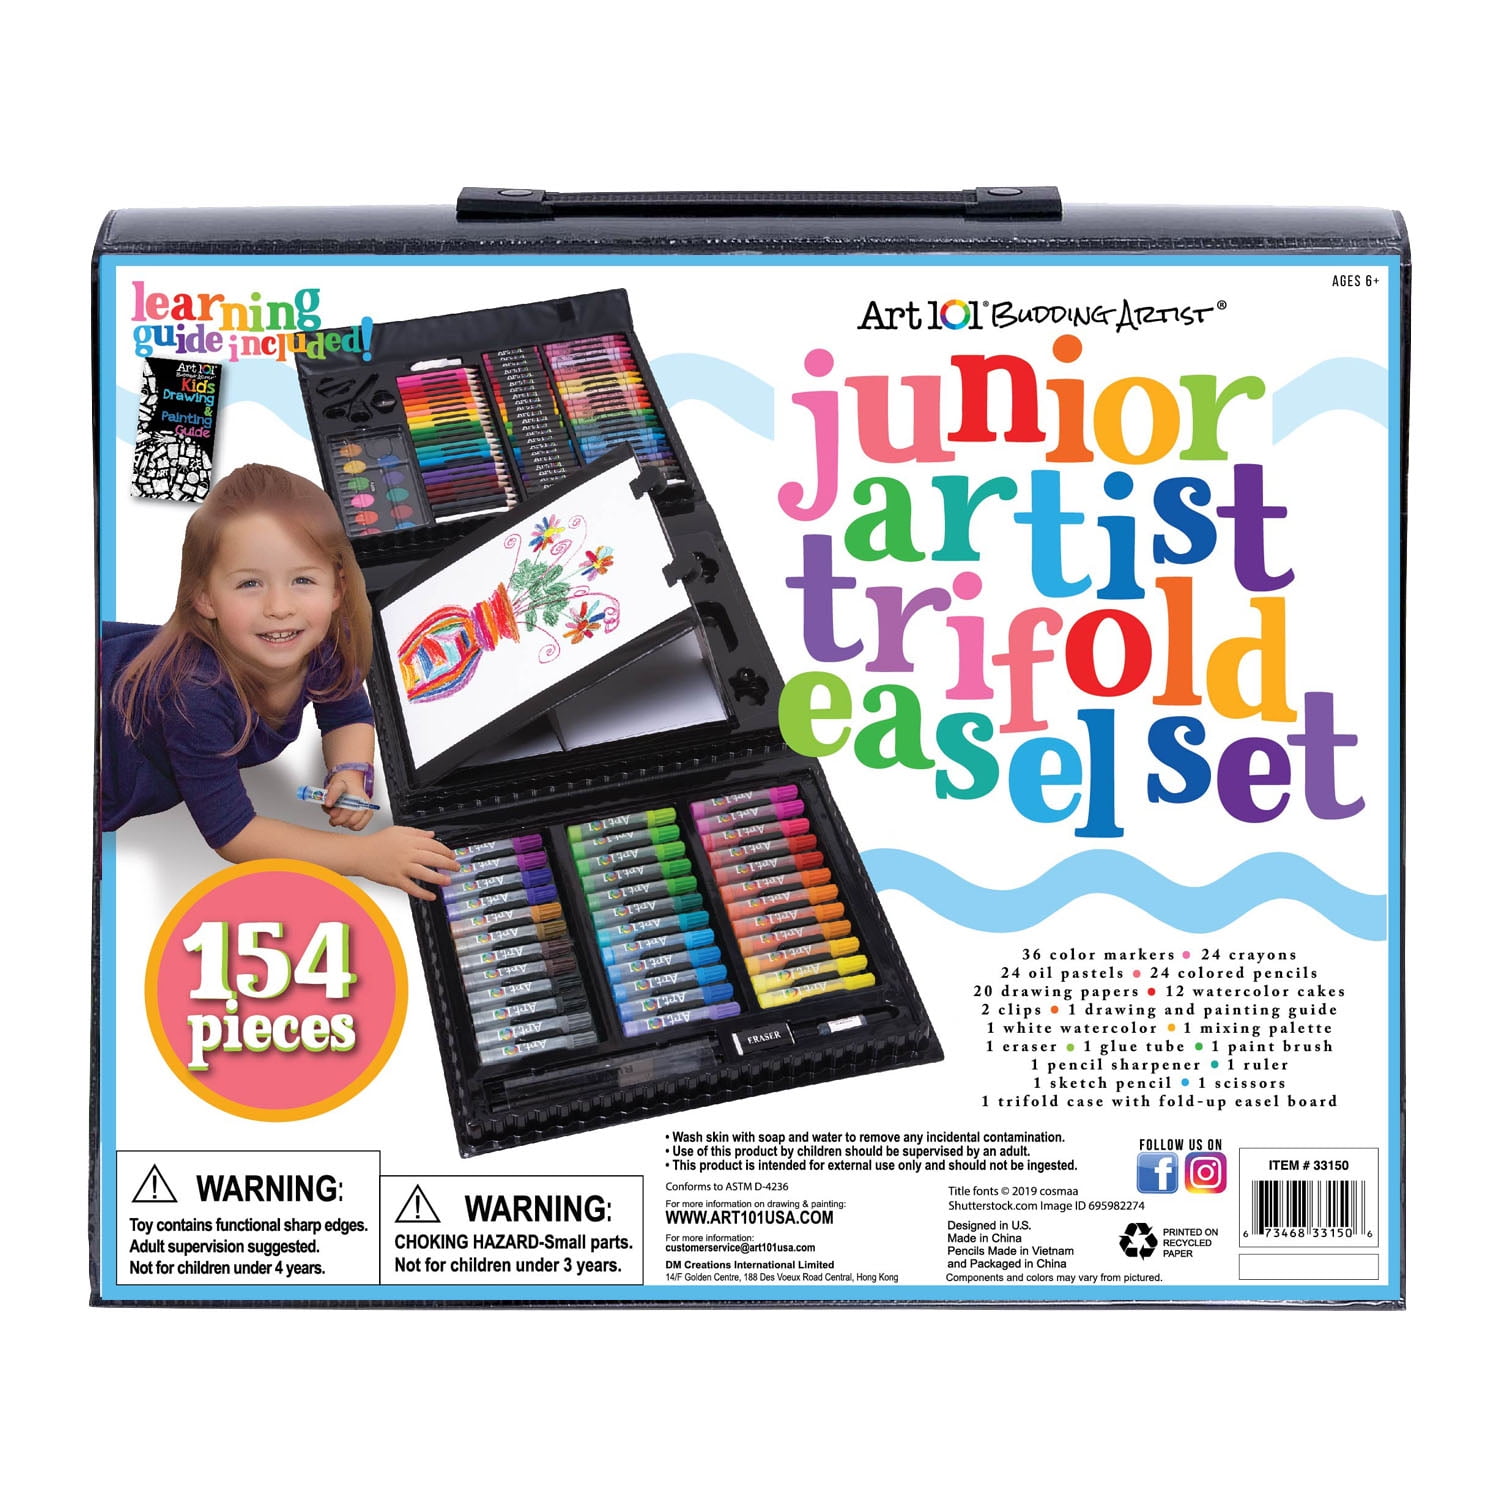 Buy Wholesale China Kids Art Painting Dot Markers Washable Safe Ink Bingo  Game Daubers Children Drawing Sets & Drawing Toy Bingo Marker Pen at USD  4.3